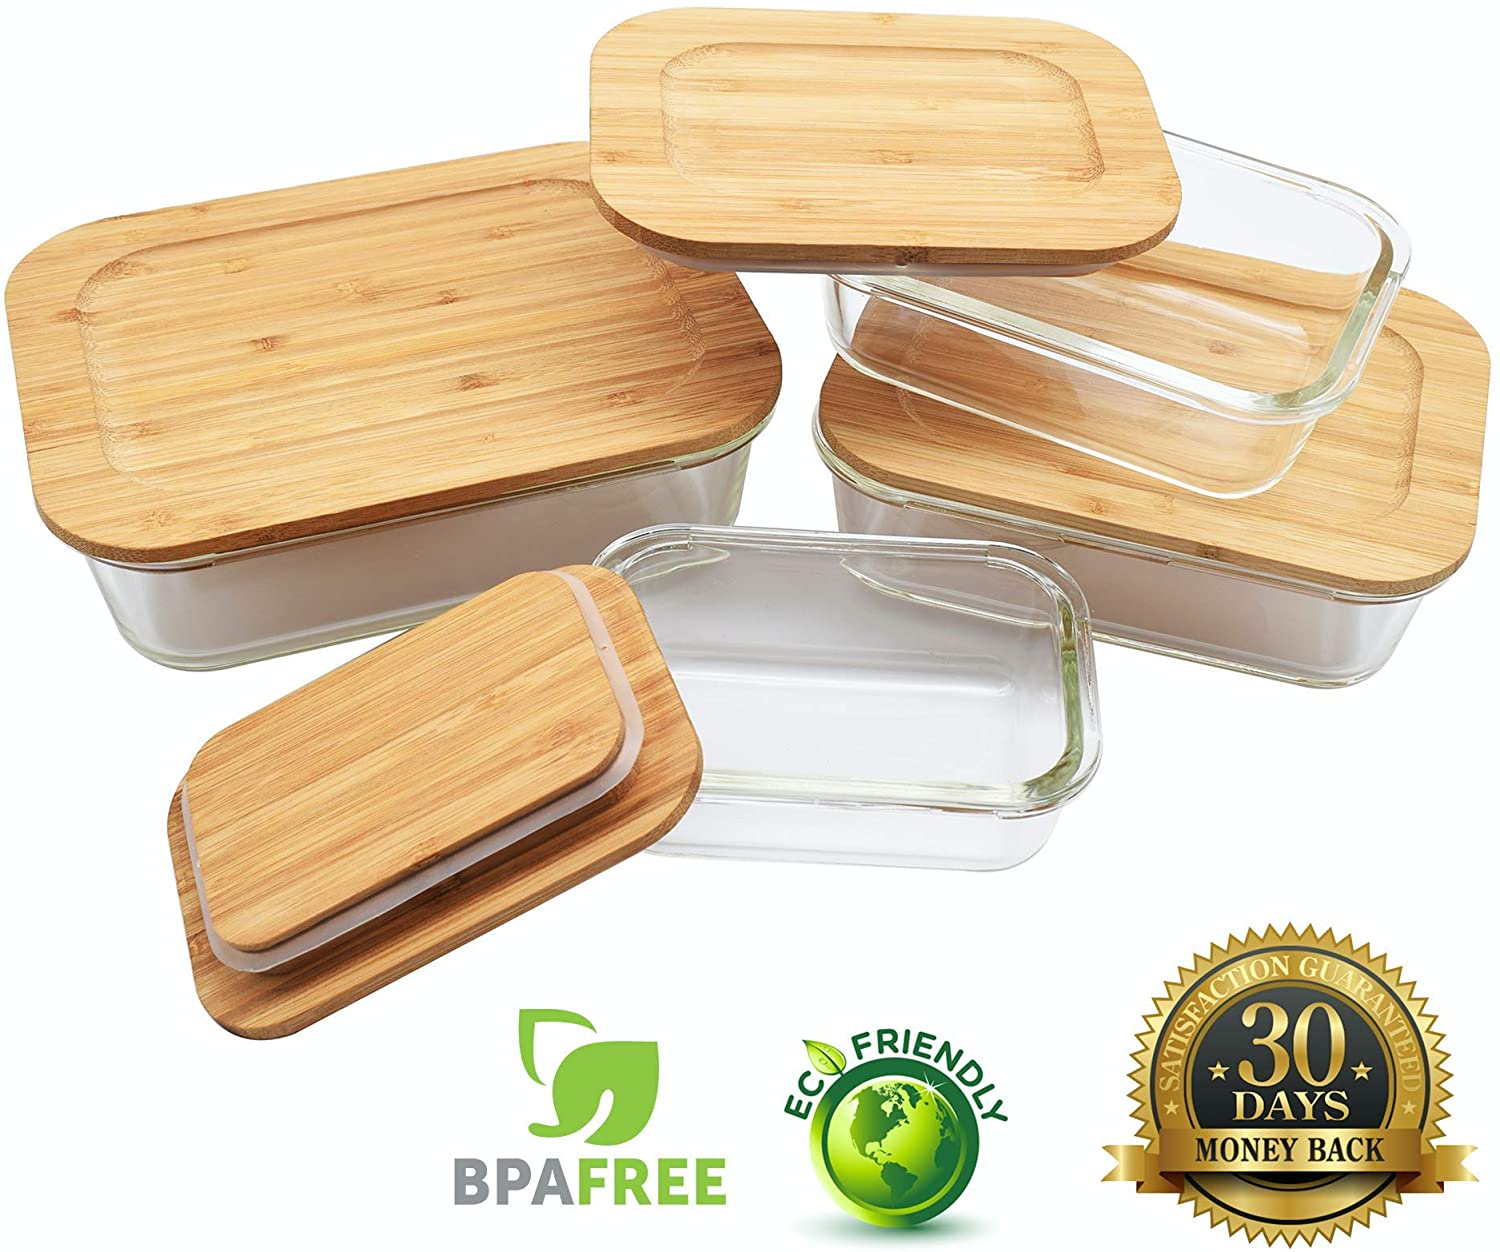 TIBLEN 4-Pack Glass Food Storage Containers with Bamboo Lids, Meal Prep Ecofriendly Containers with Lids for Kitchen, Home Use, Safe for Microwave